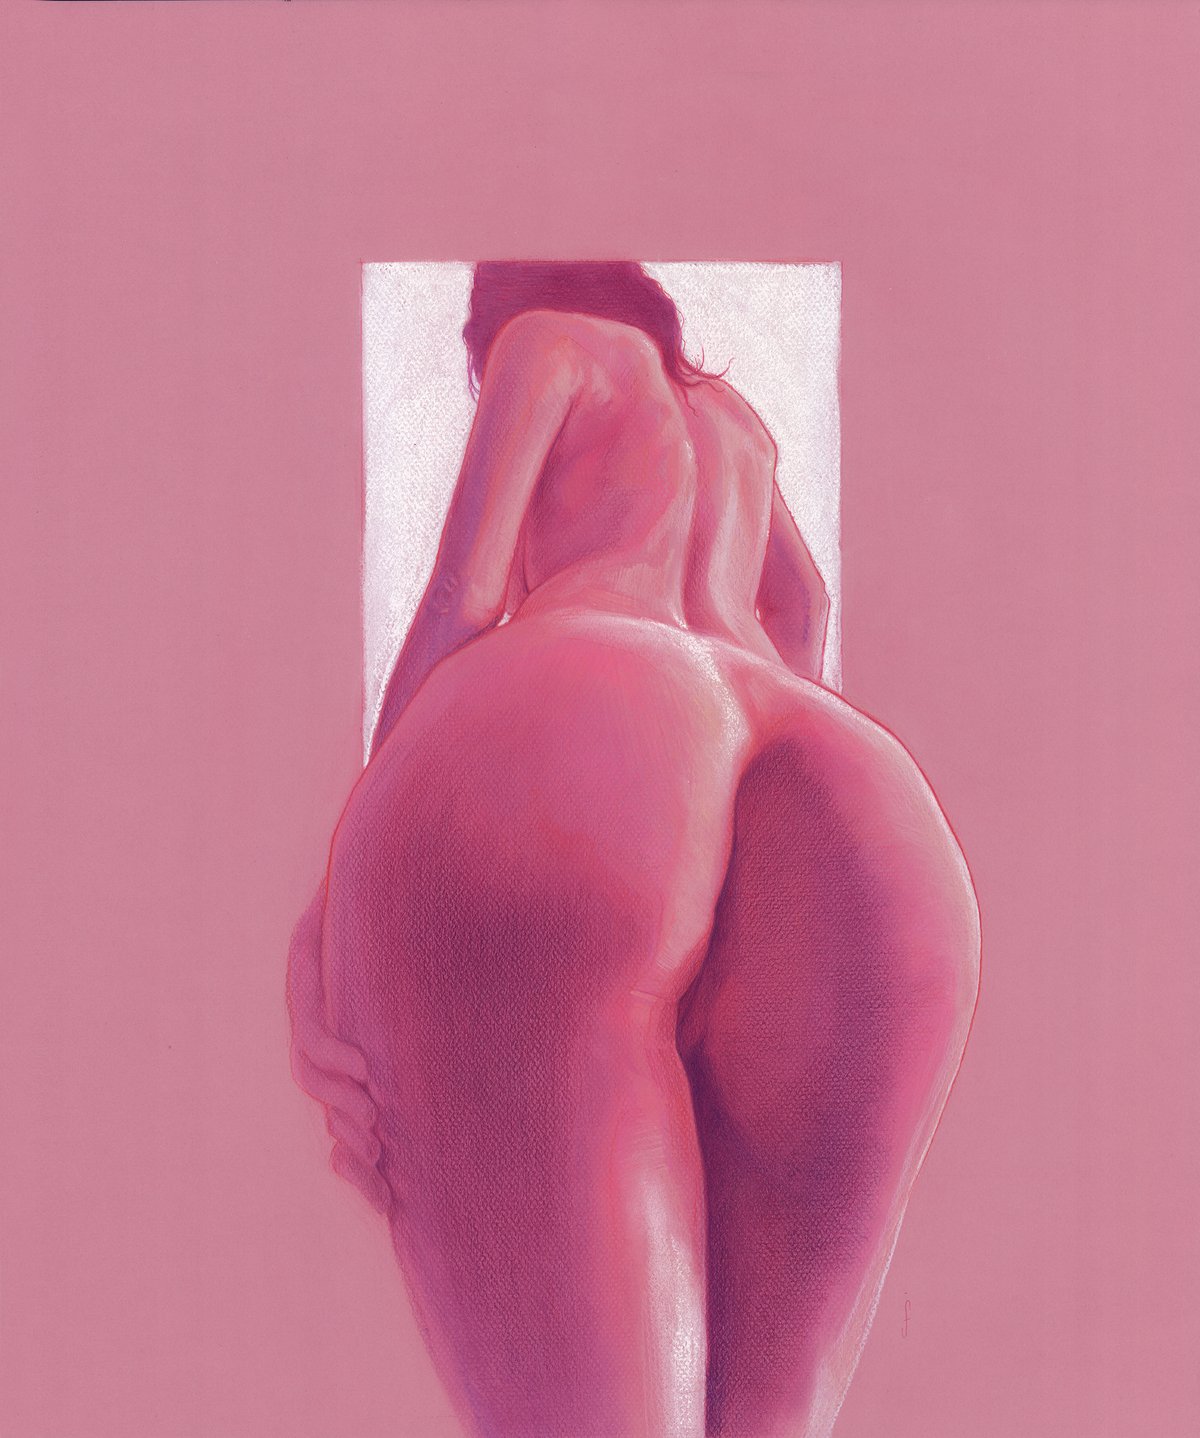 untitled figure study in pink 